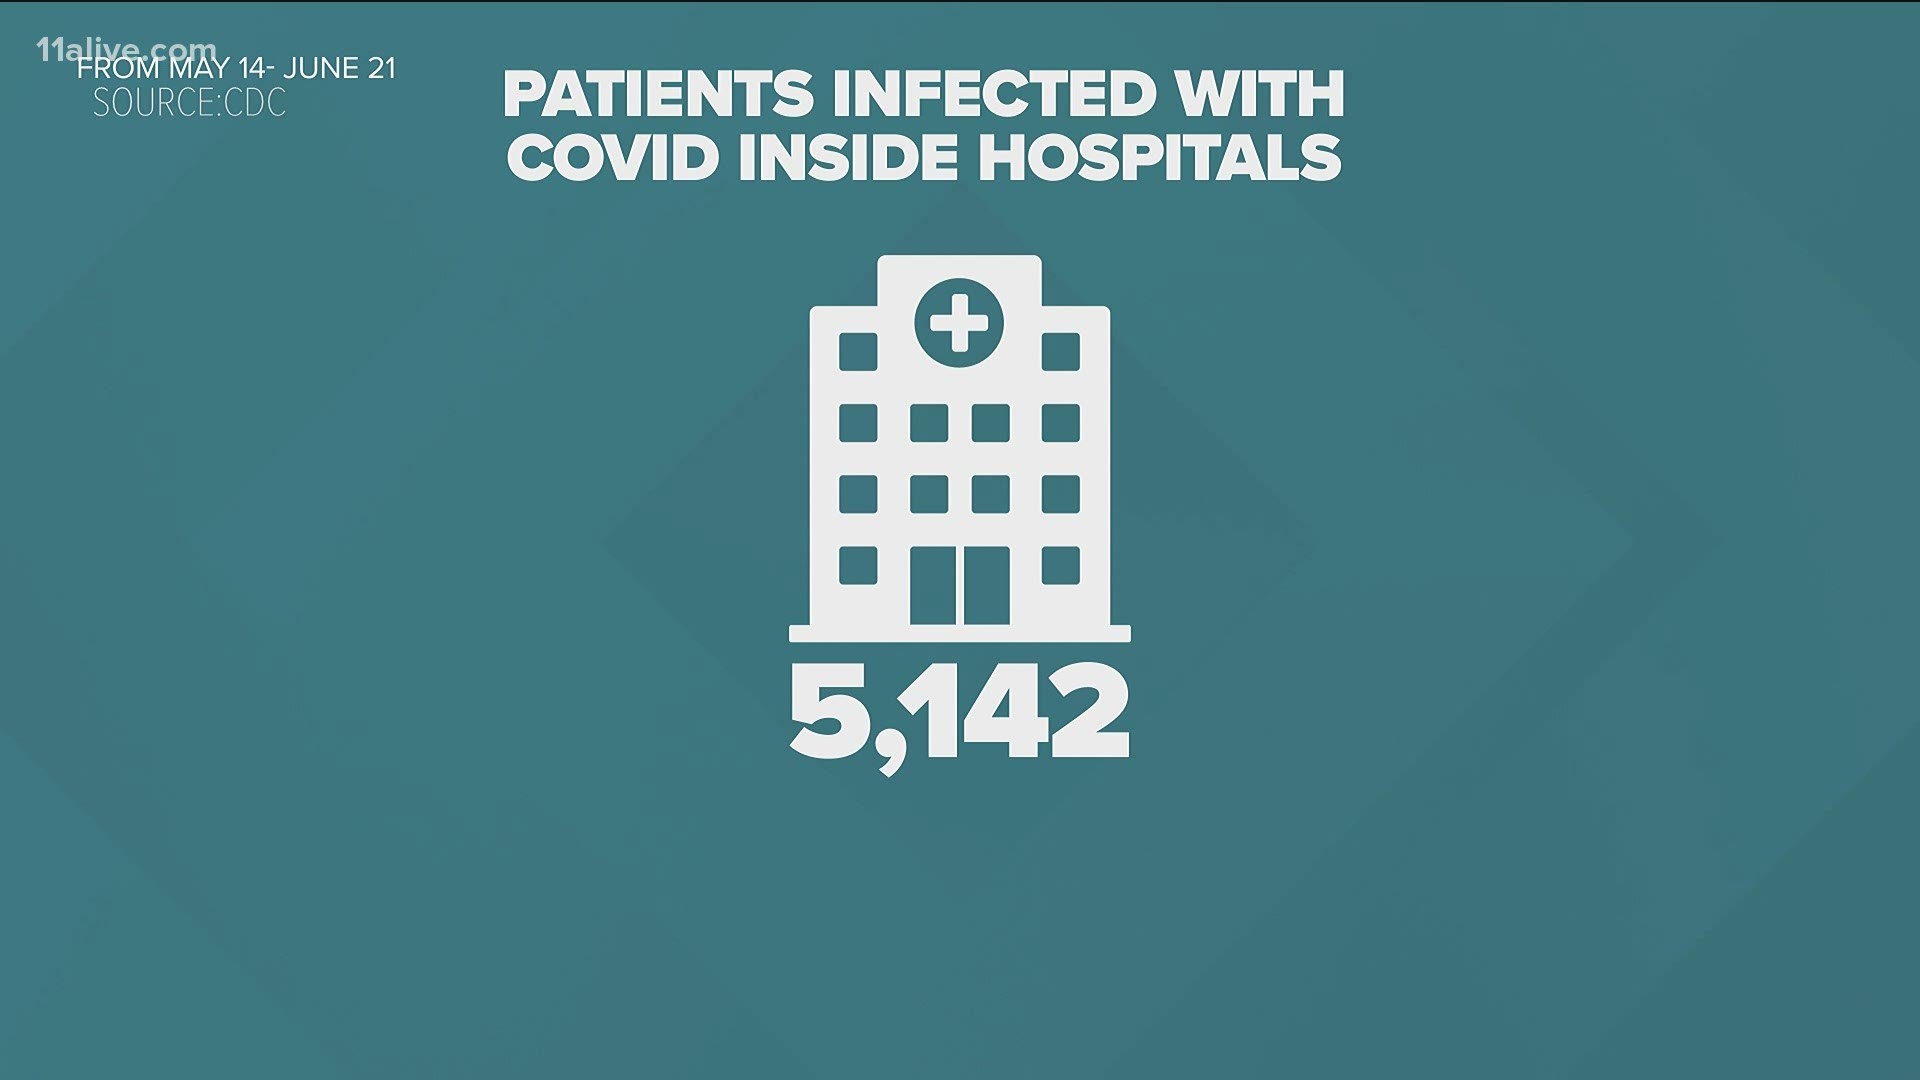 From May 14 to June 21, hospitals across the country identified more than 5,000 patients who were infected with COVID-19 at a hospital.